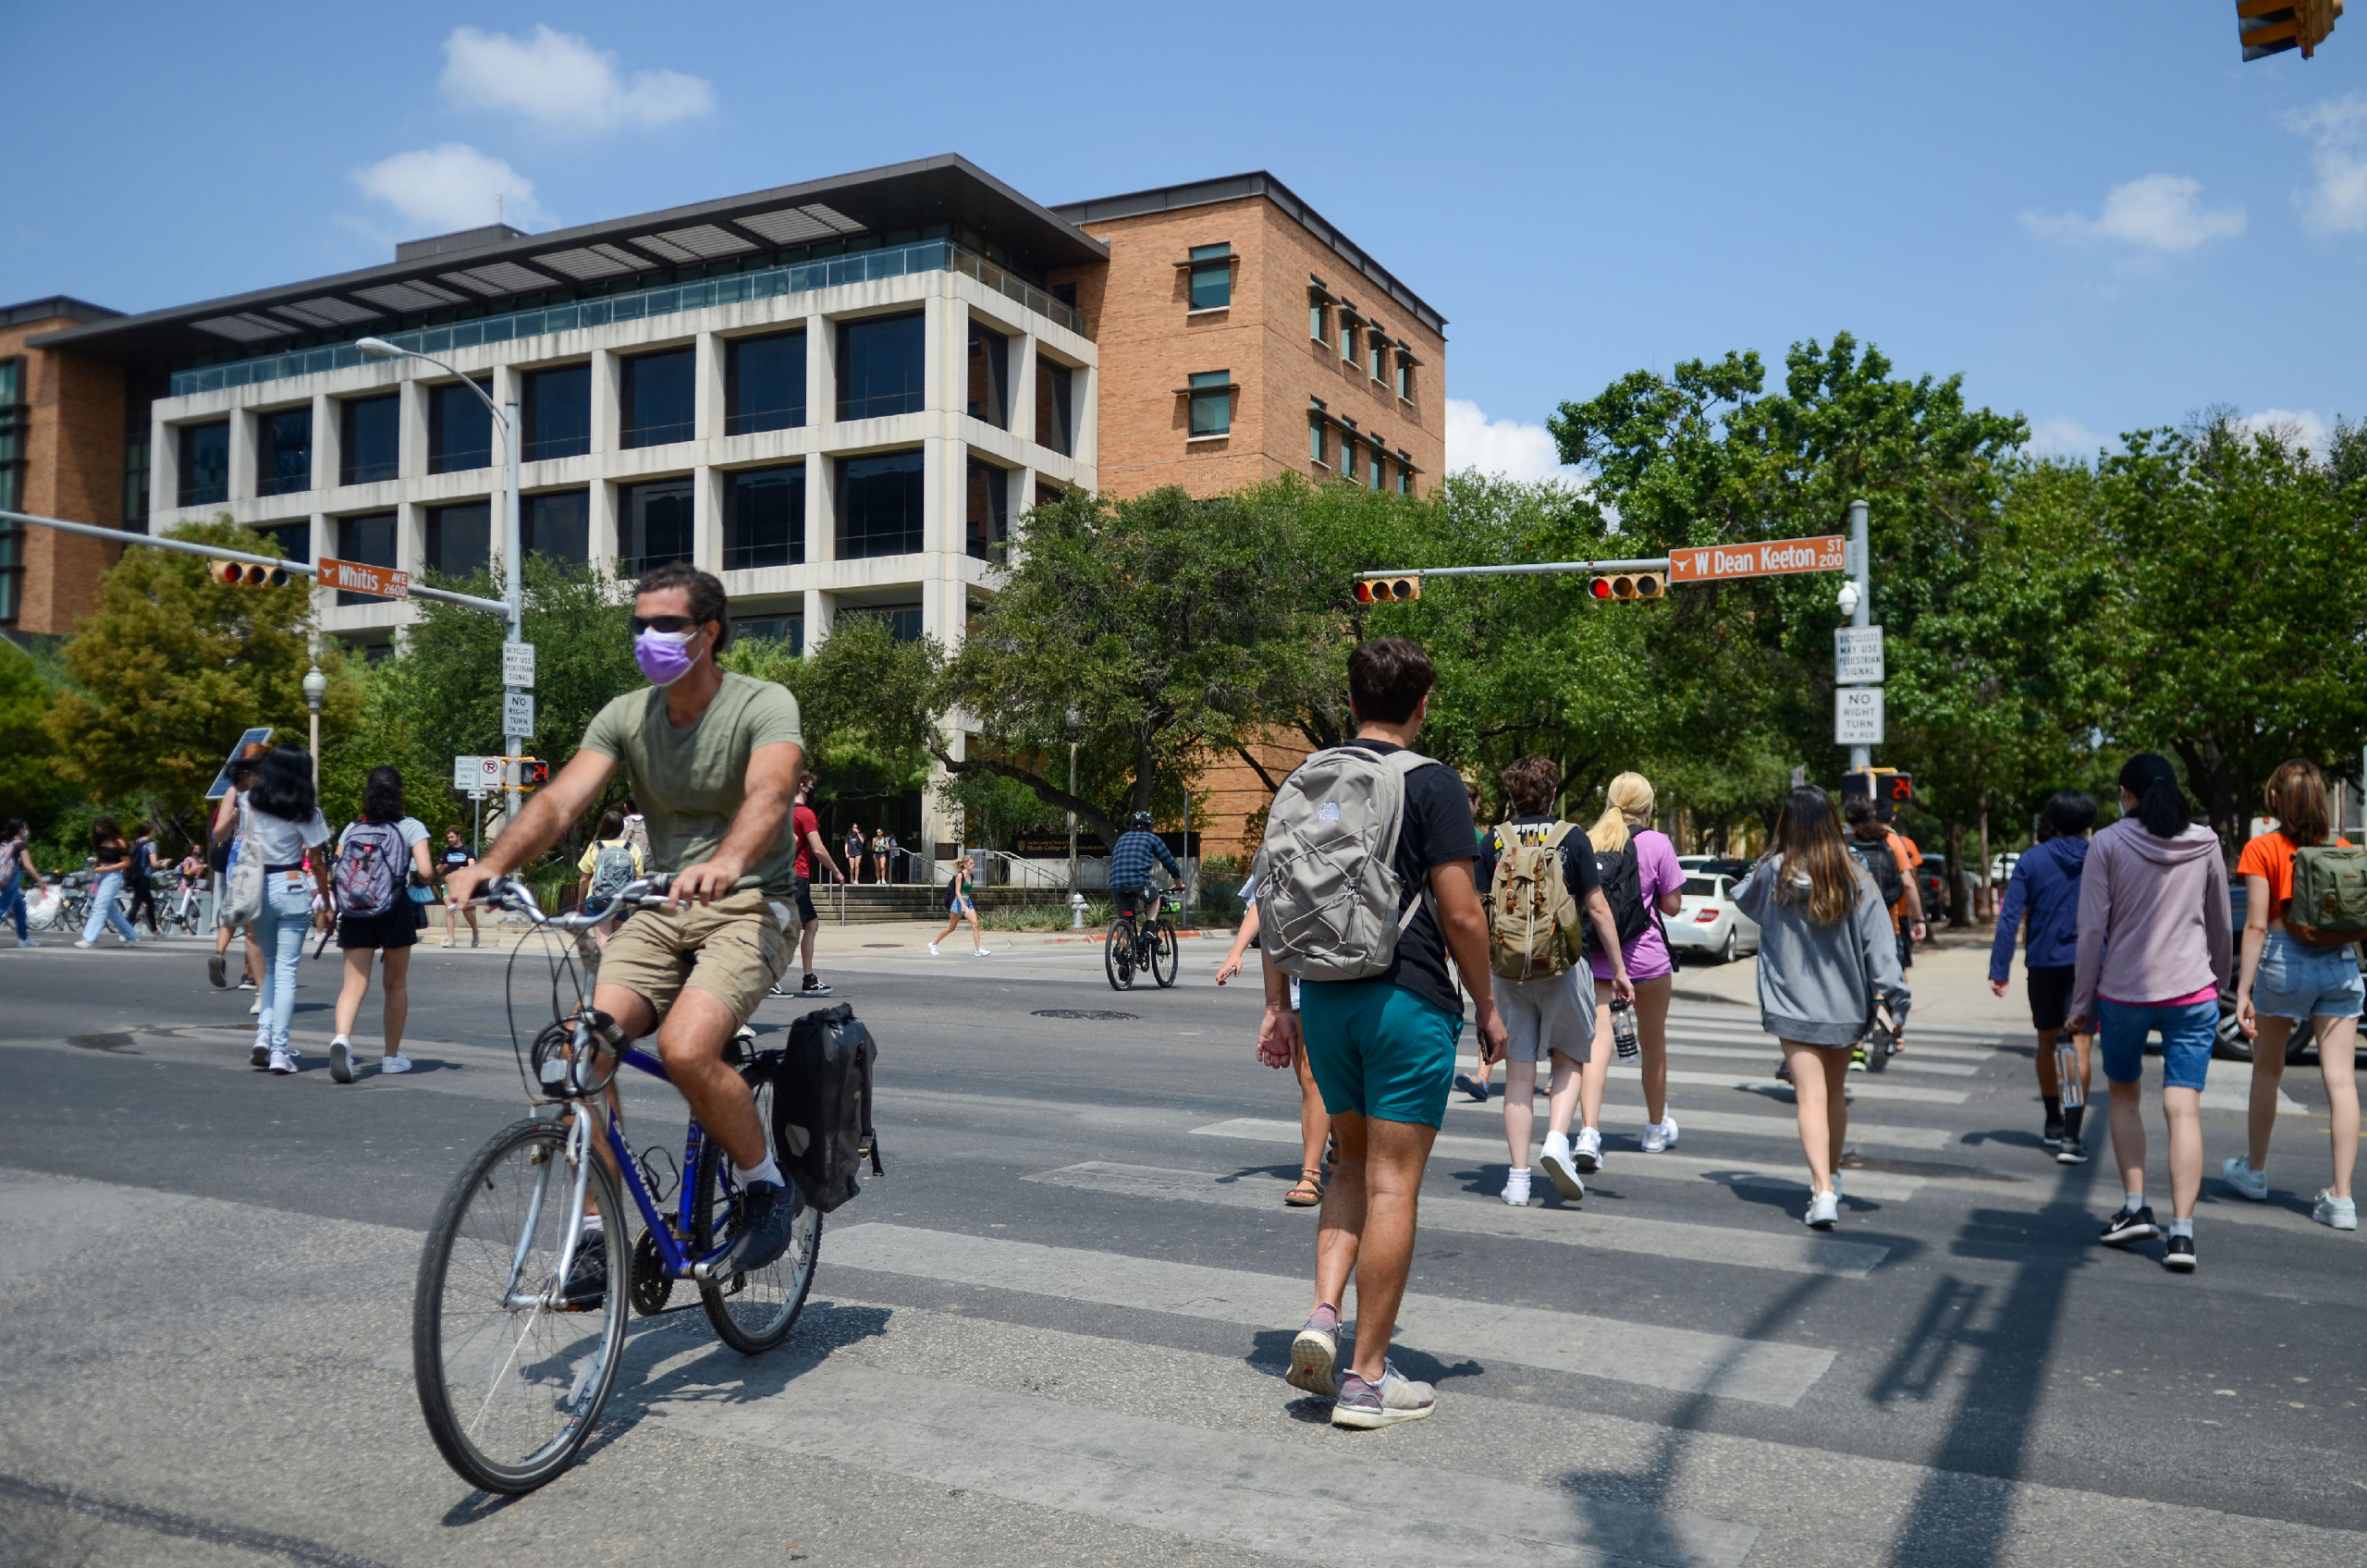 People cross the street at the UT-Austin campus